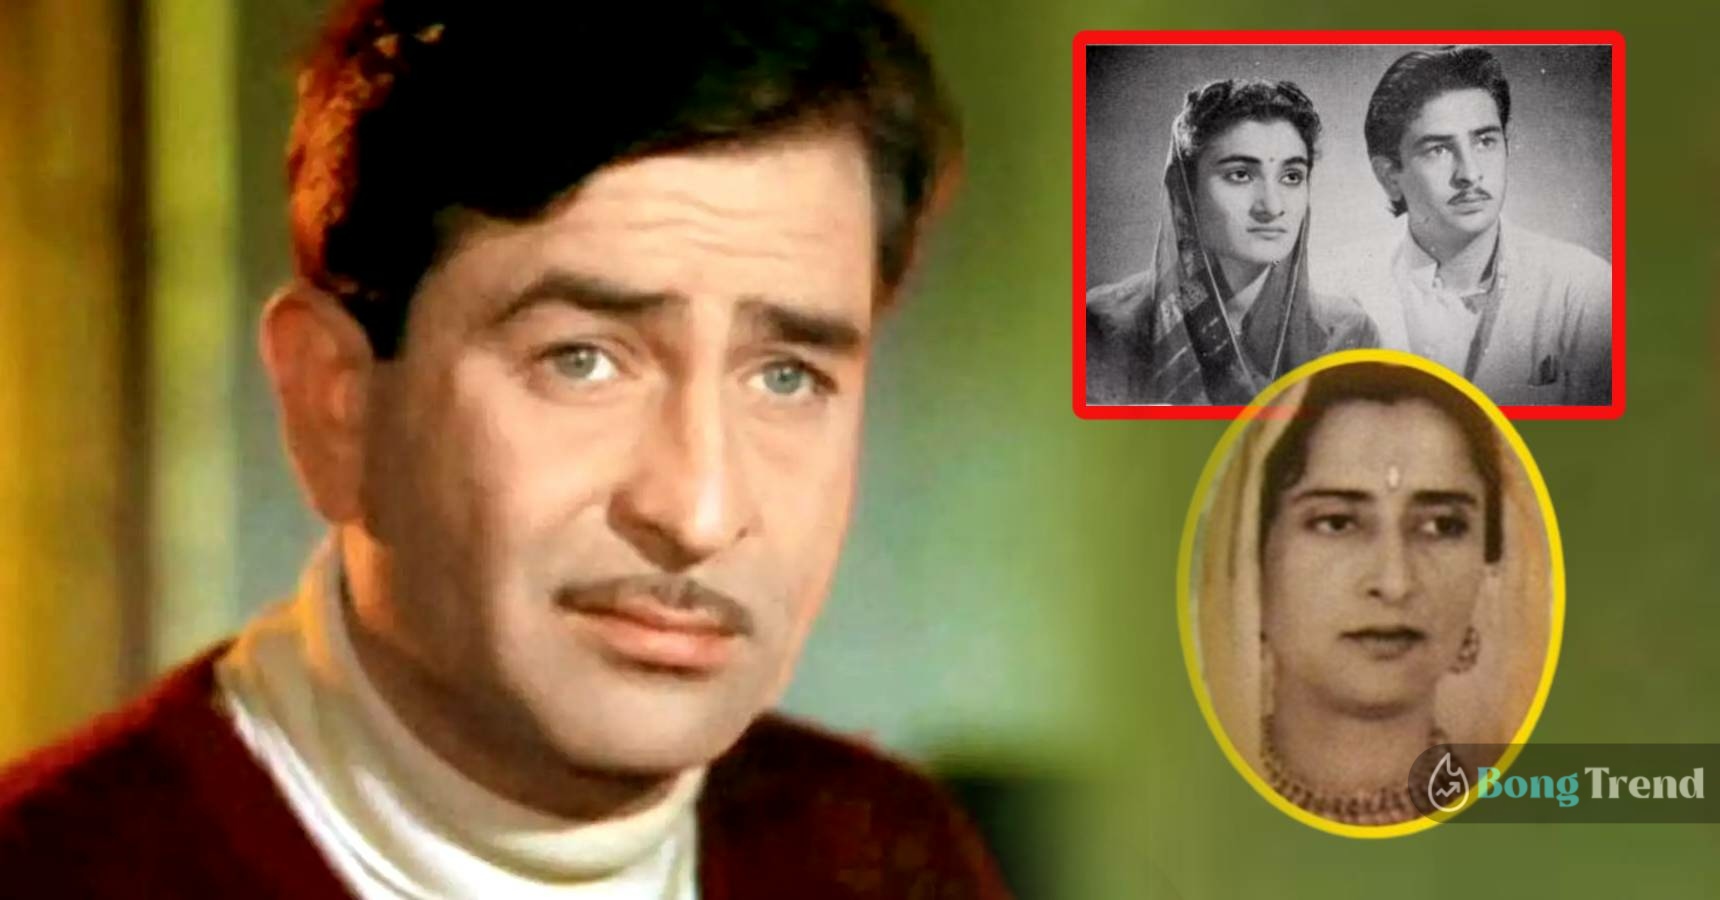 Legendary Bollywood actor Raj Kapoor’s controversial personal life